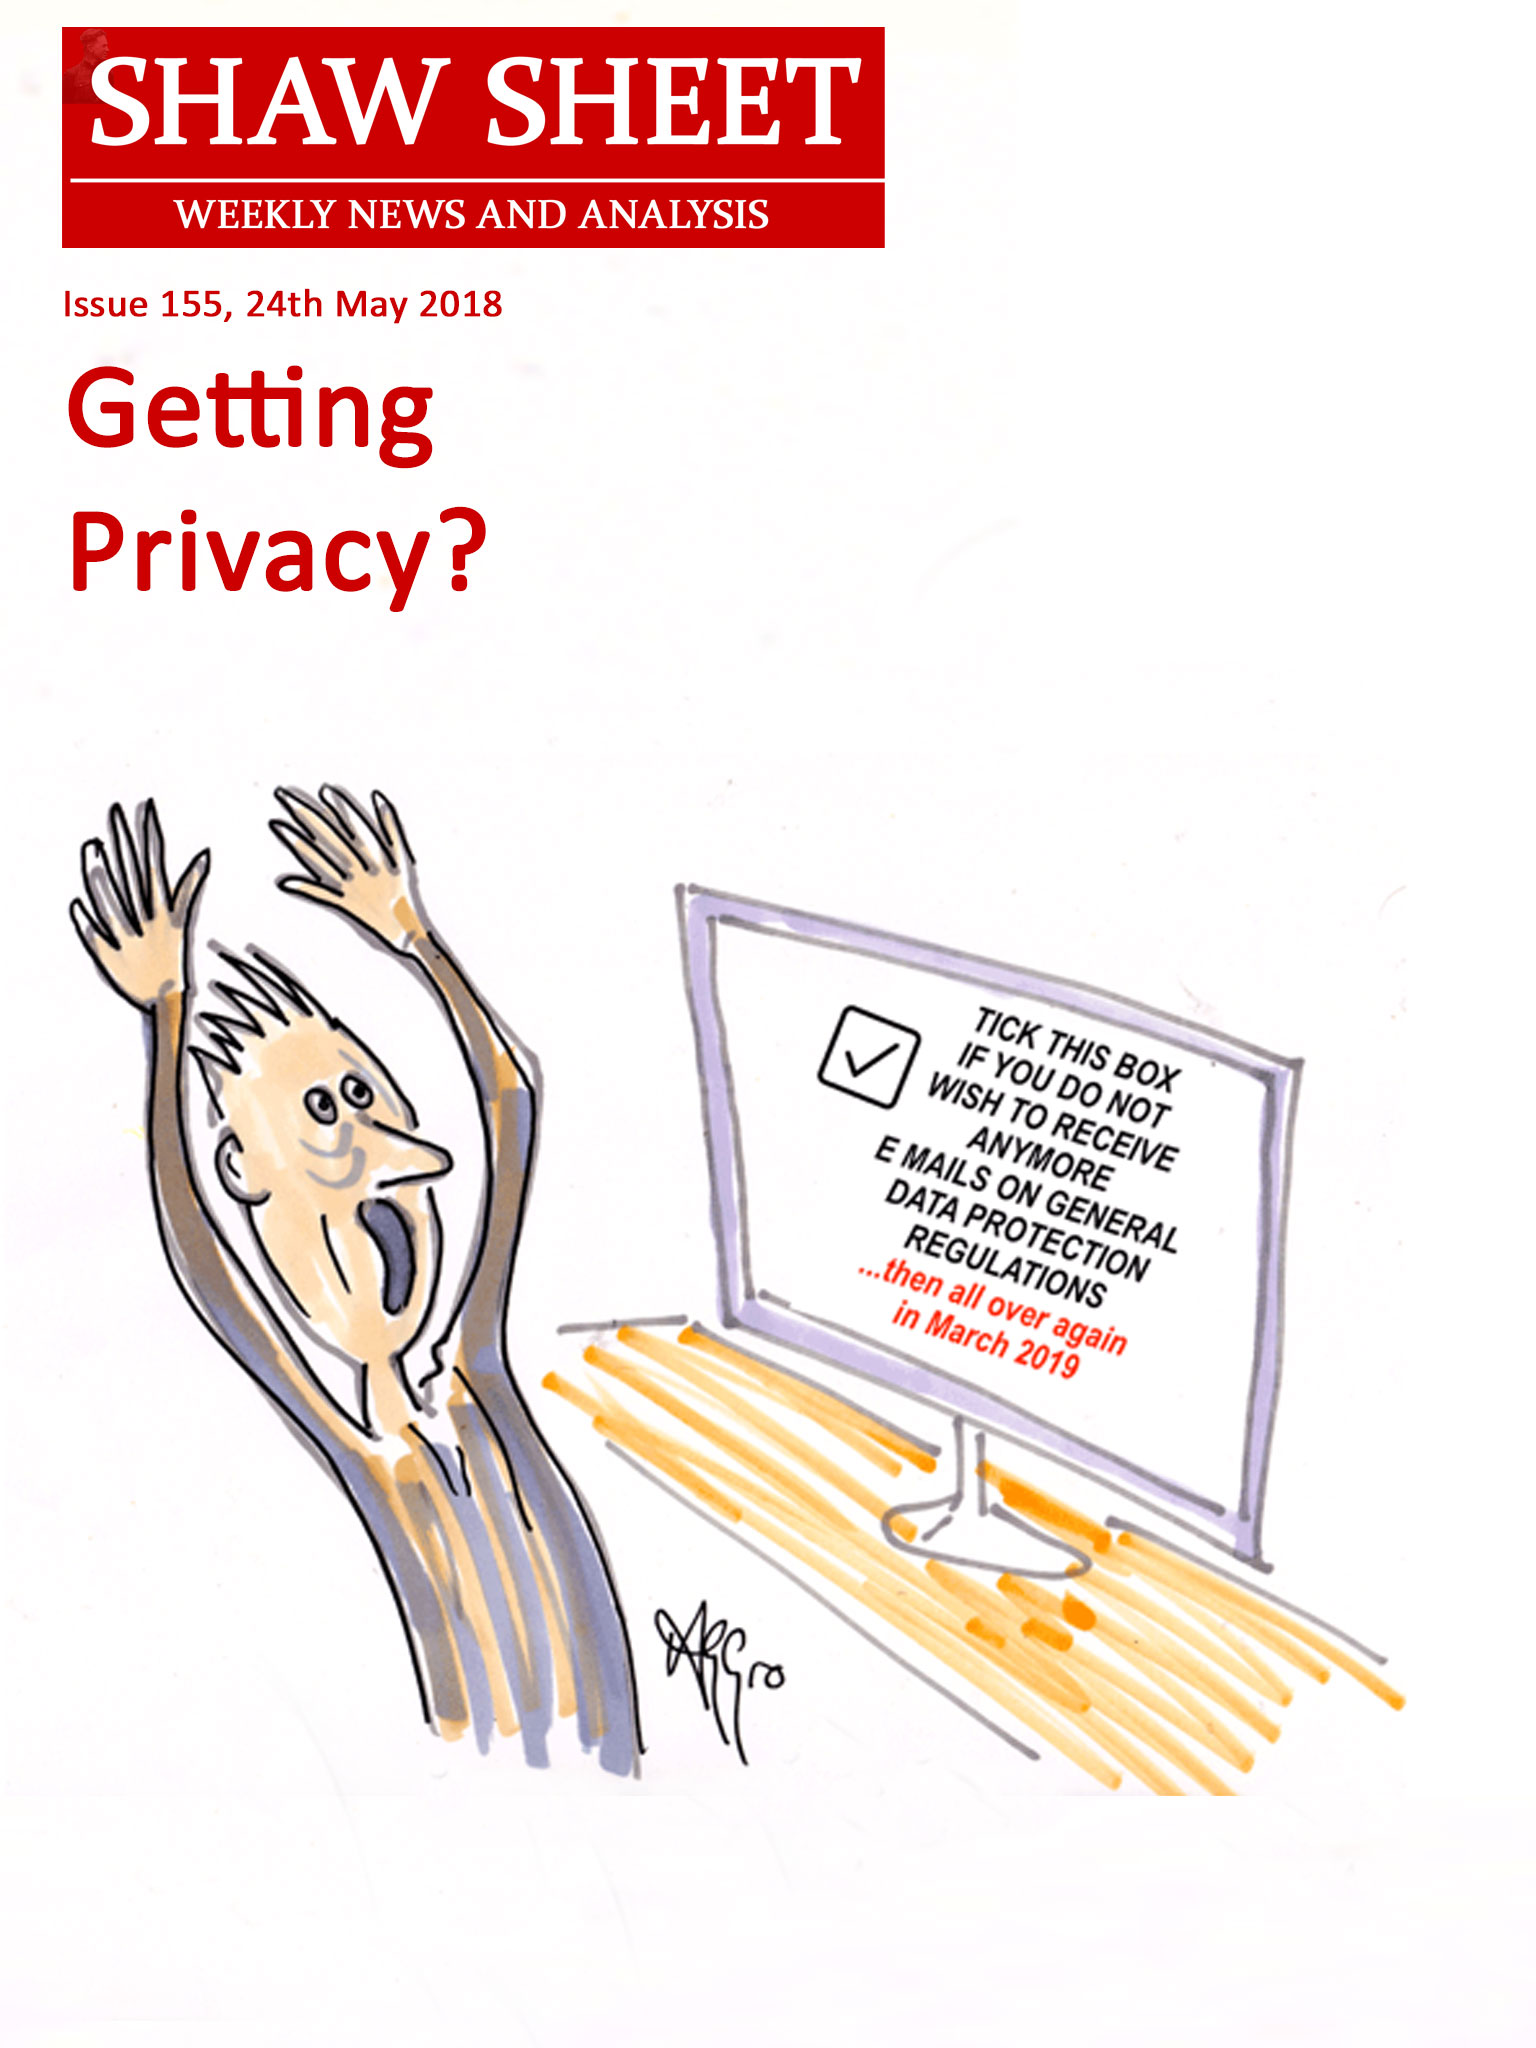 Cover Image for Issue 155 Getting Privacy GDPR cartoon by Aggro as the basis